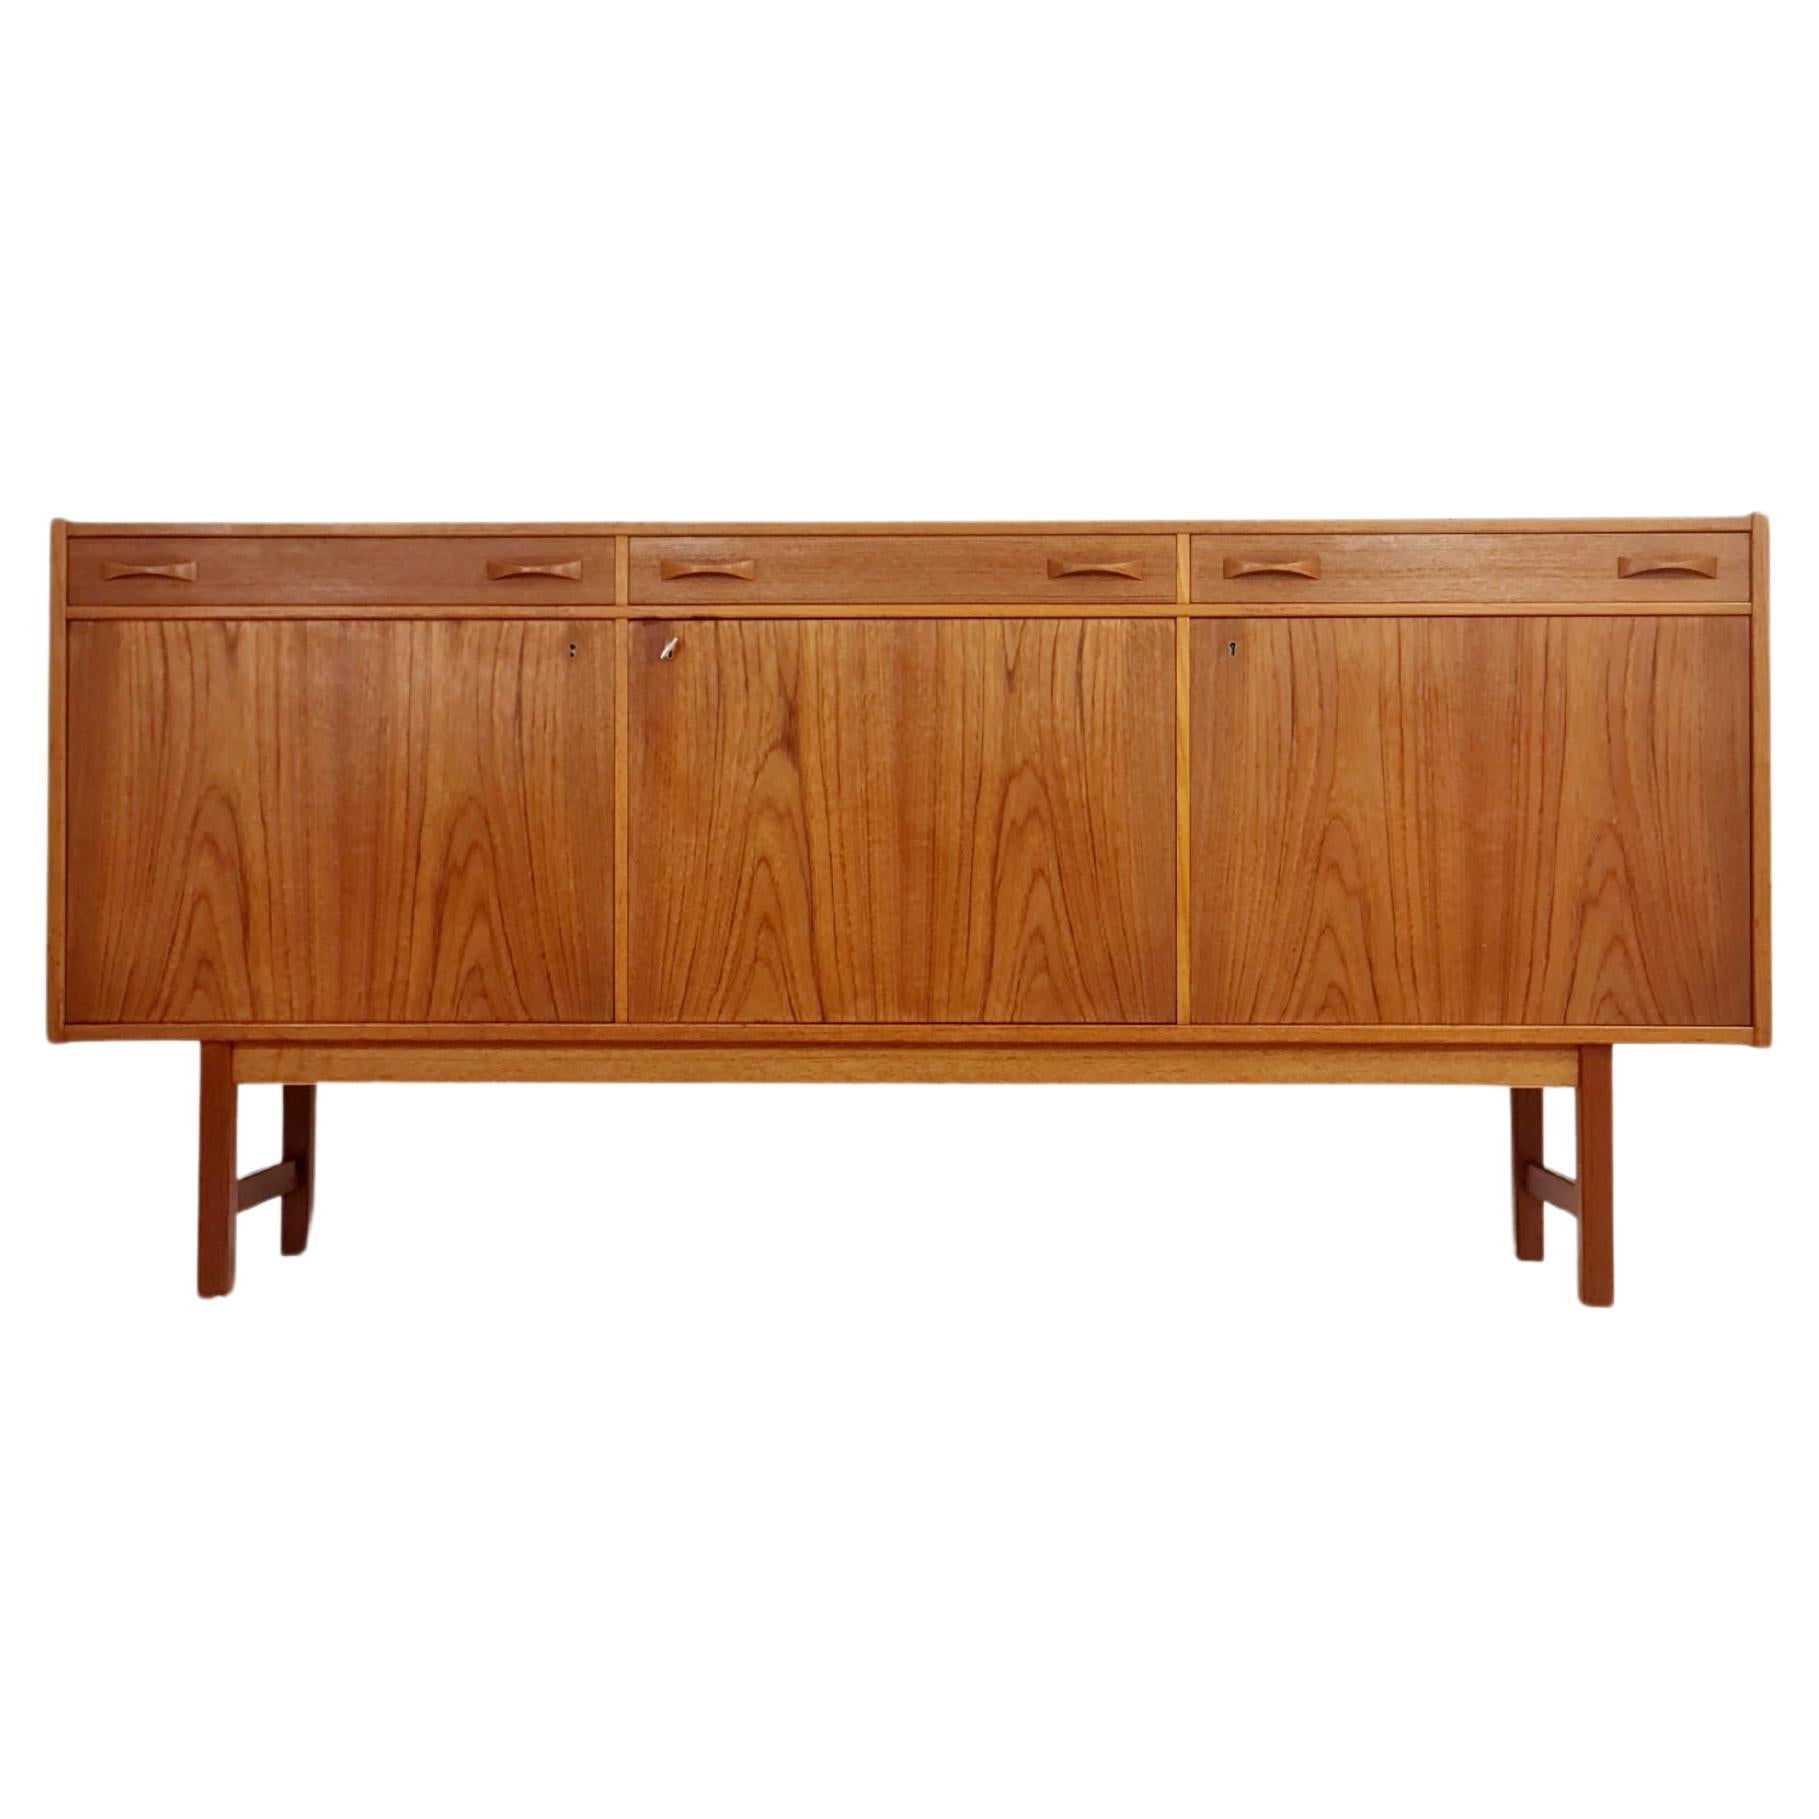 Mid century Swedish Teak Sideboard by Tage Olofsson for Ulferts, 1960s